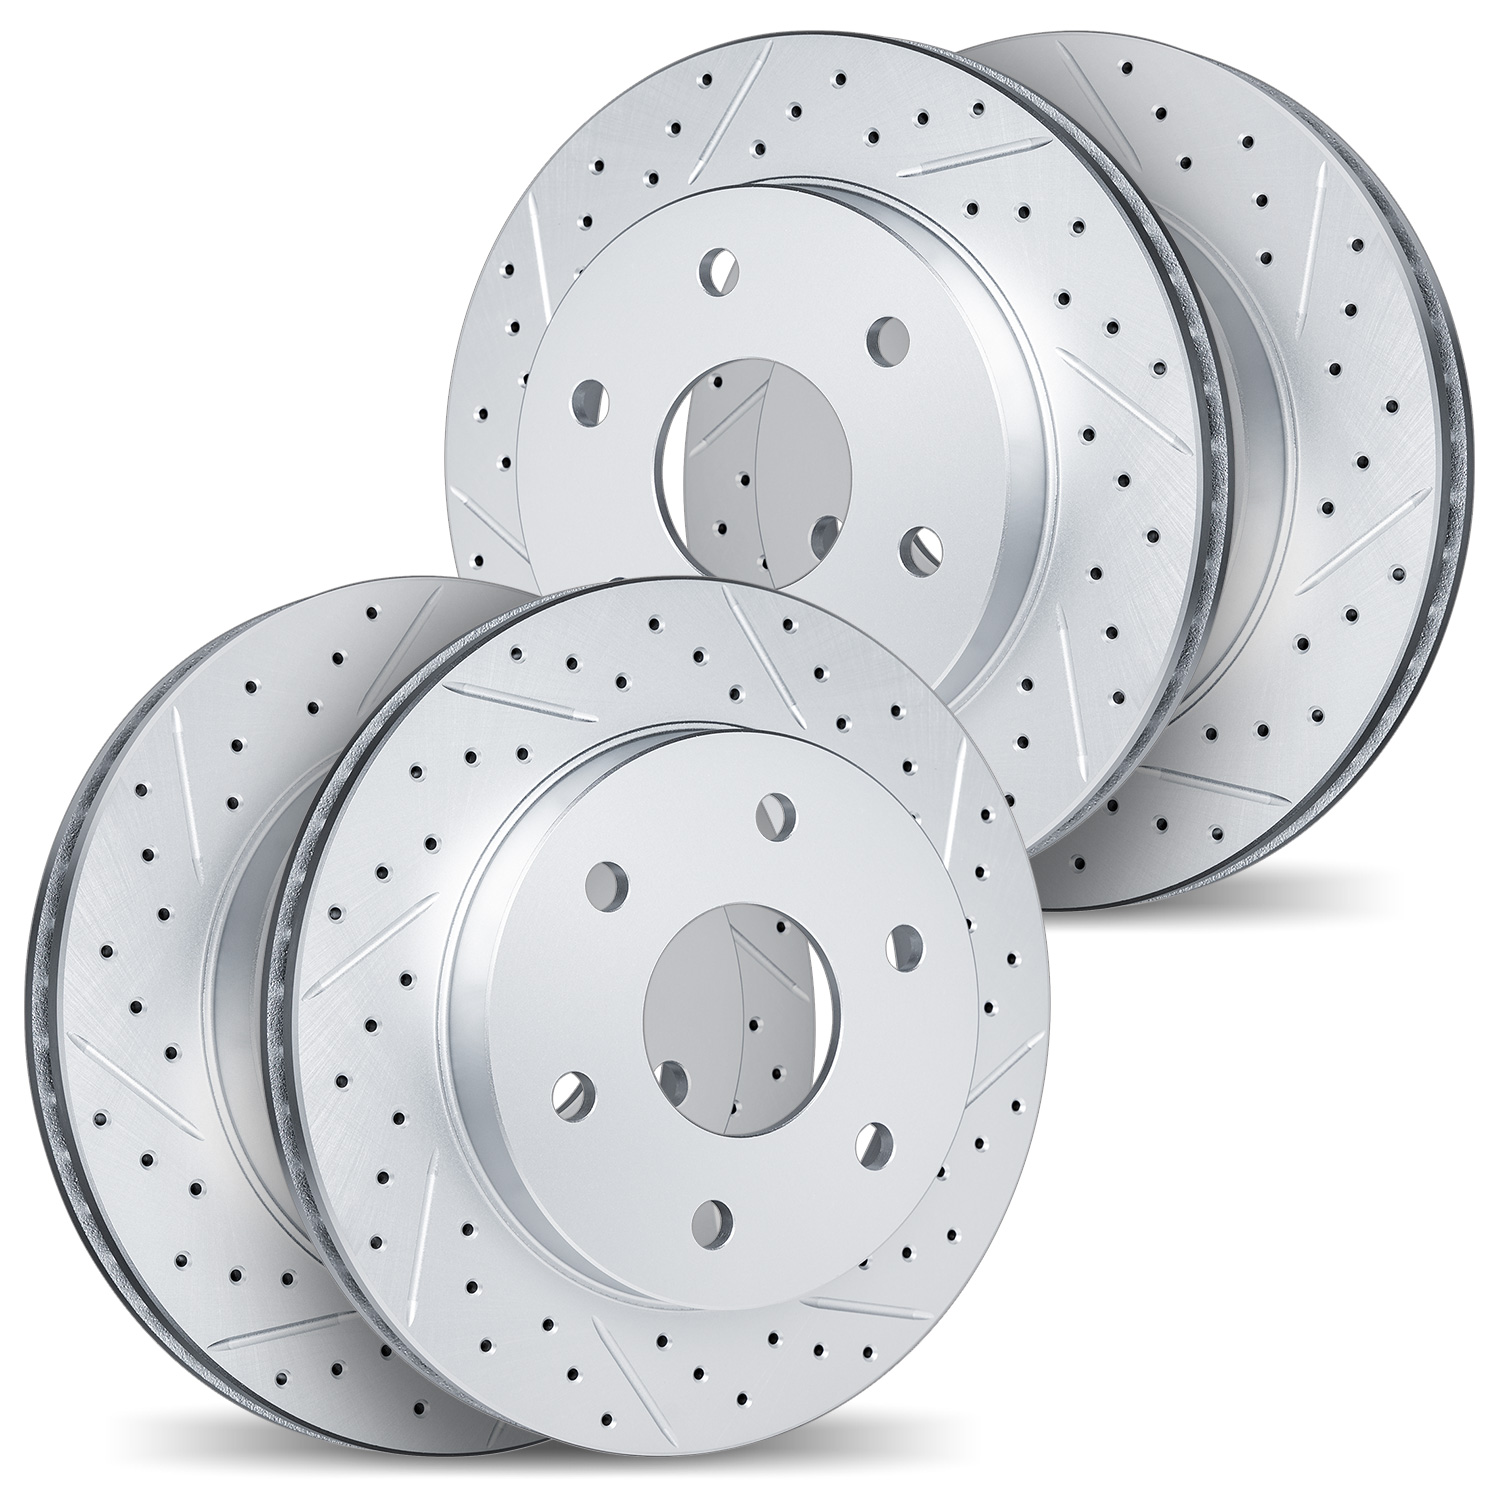 2004-67056 Geoperformance Drilled/Slotted Brake Rotors, 2008-2011 Infiniti/Nissan, Position: Front and Rear